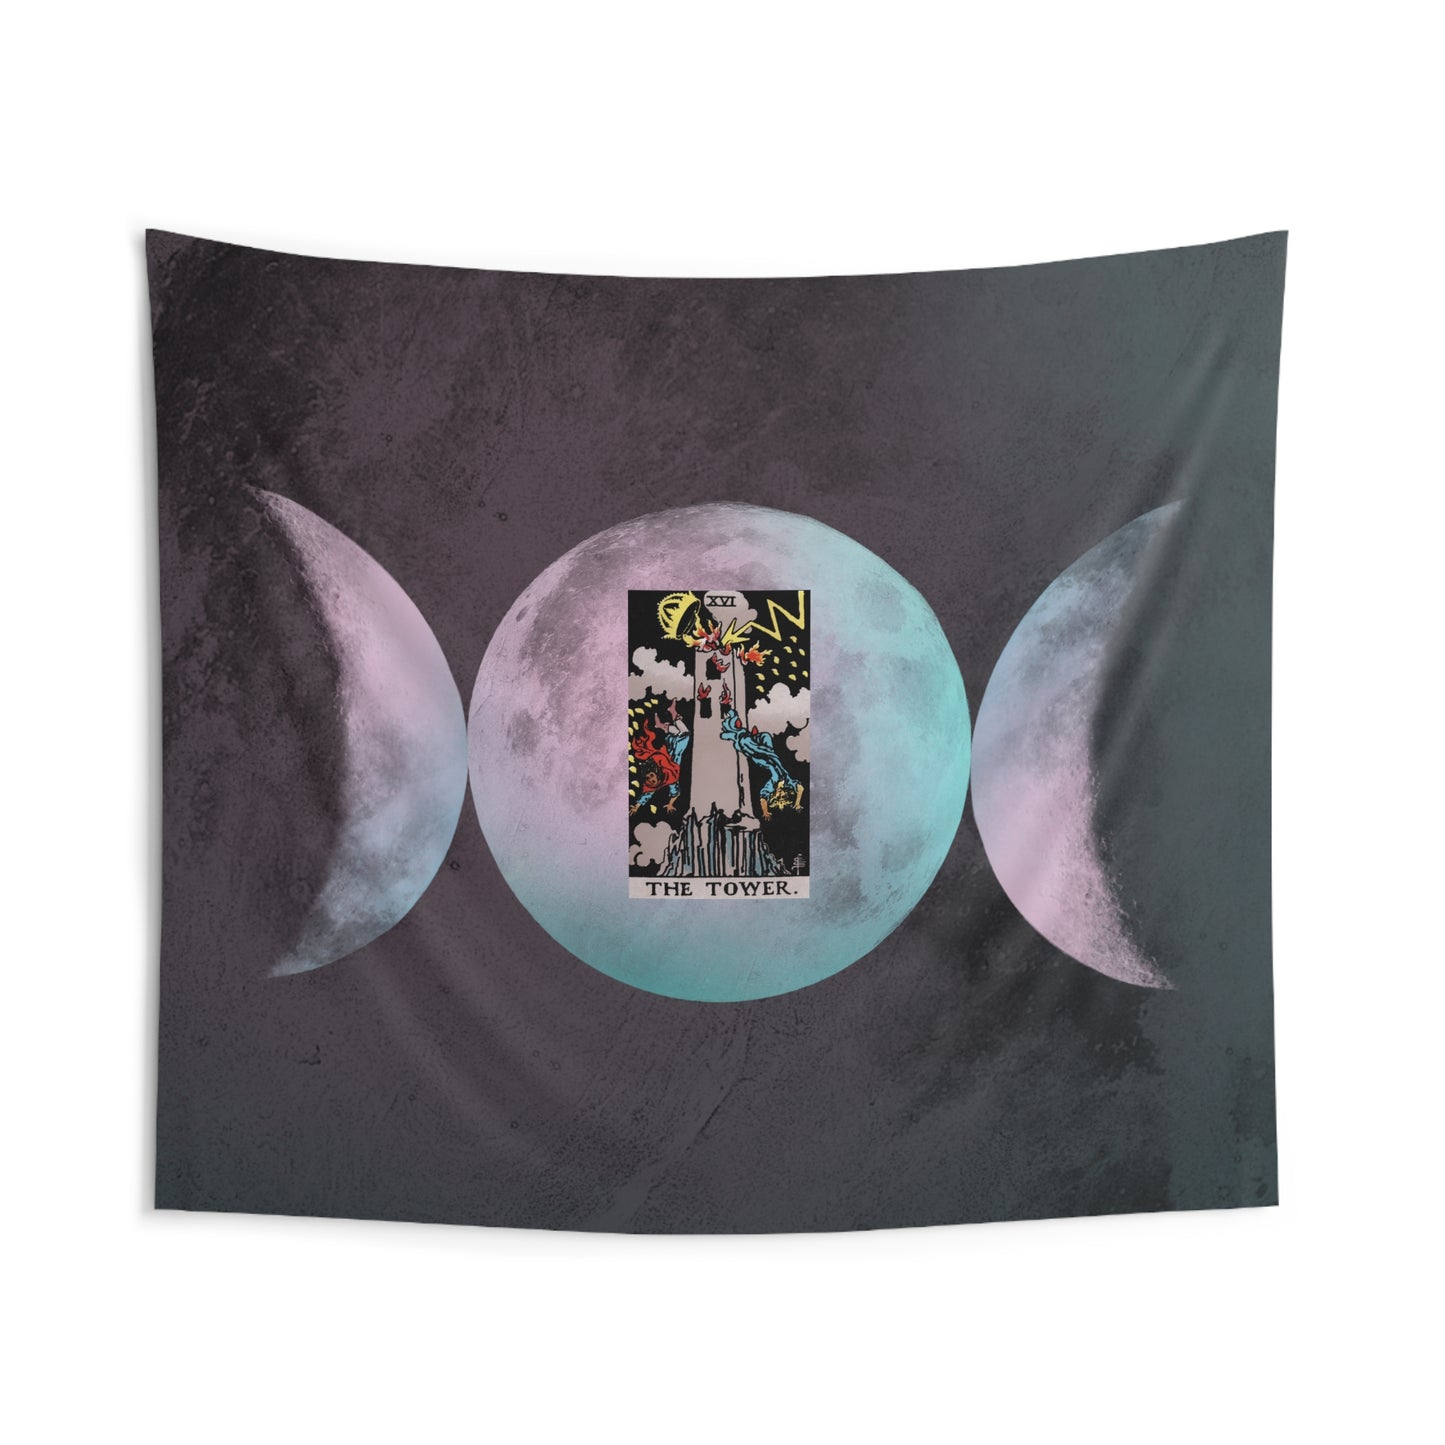 The Tower Tarot Card Altar Cloth or Tapestry with Triple Goddess Symbol